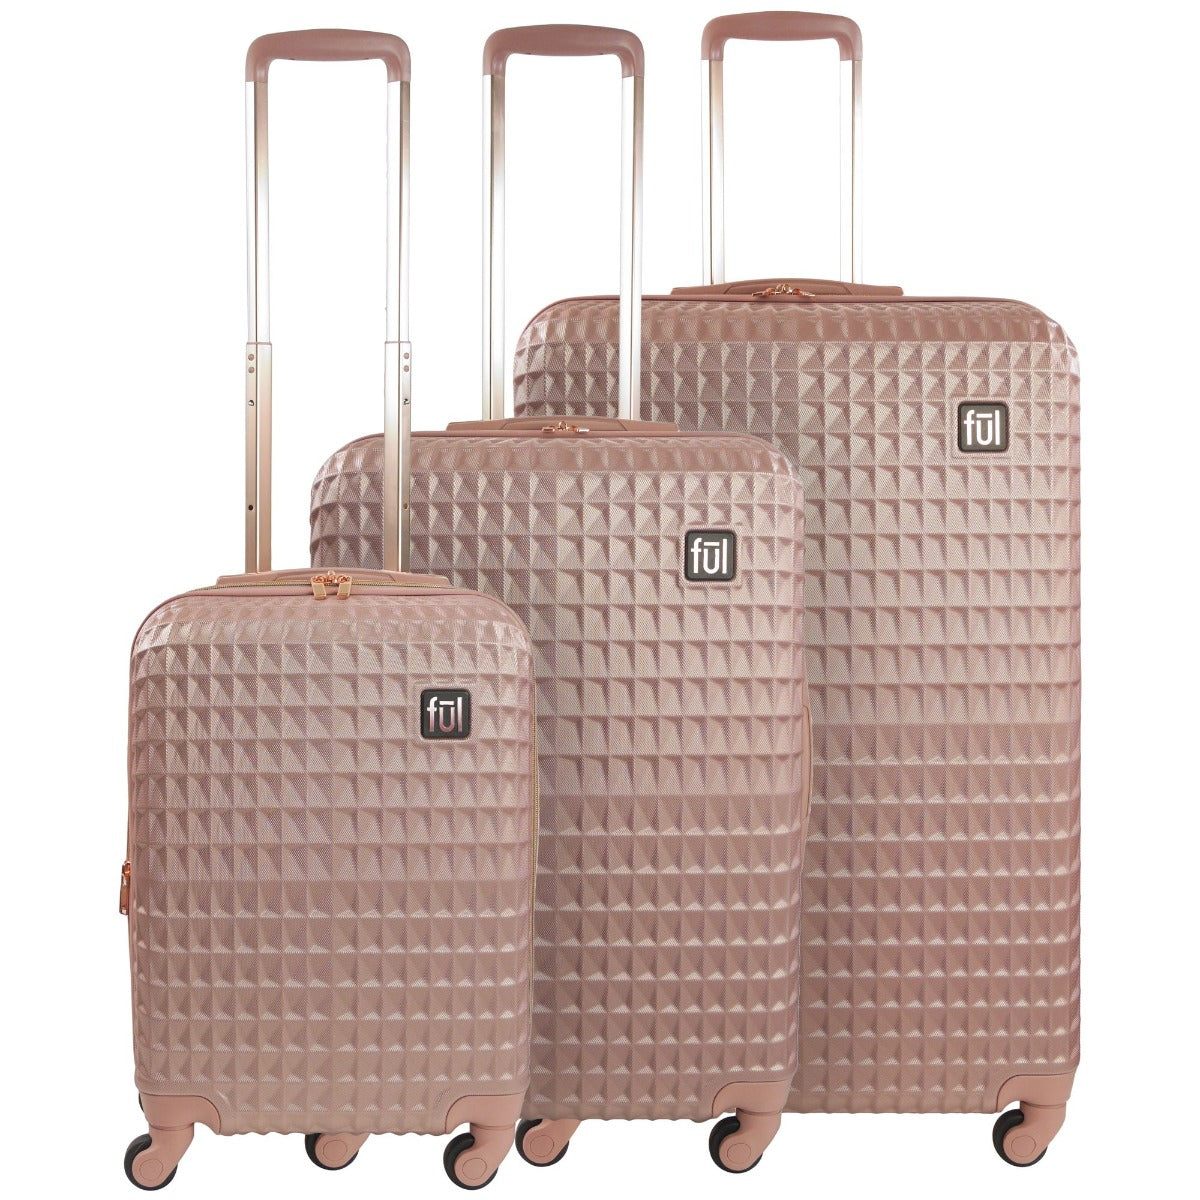 Ful Geo Hard-sided Spinner Suitcase 3-piece Luggage Set Rose Gold